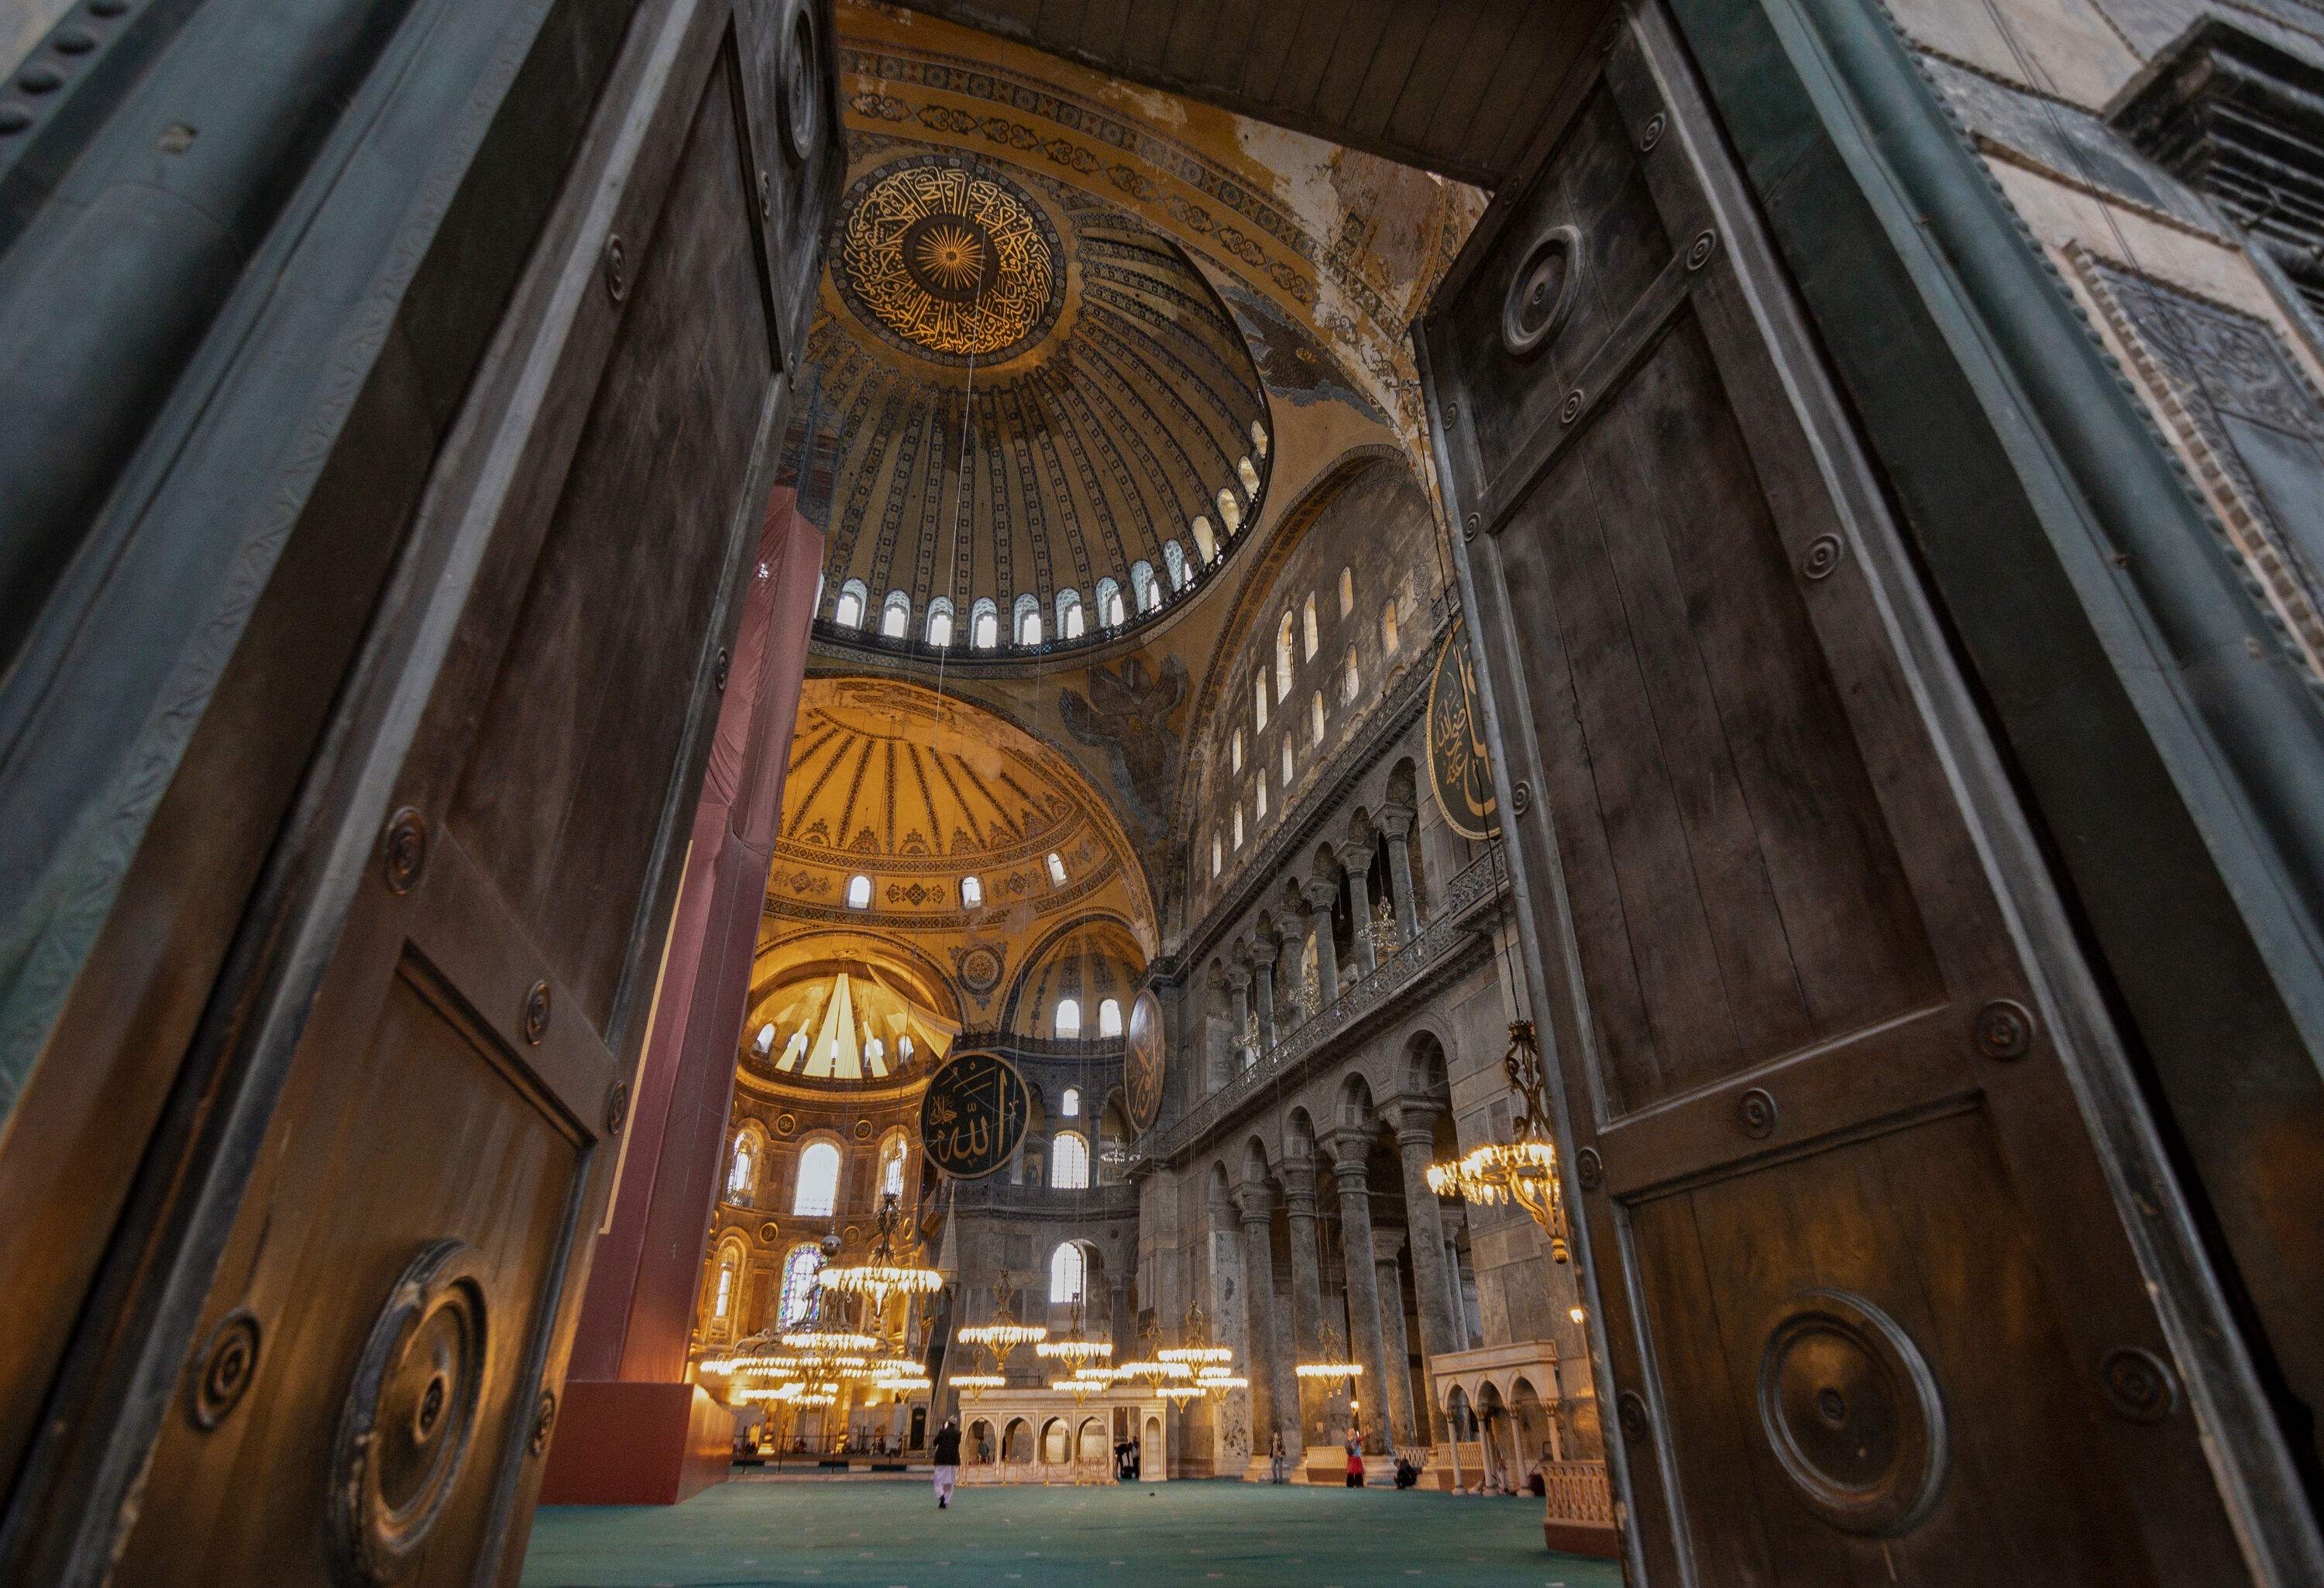 The impressive interior of the Hagia Sophia Grand Mosque as seen from its entry doorway.